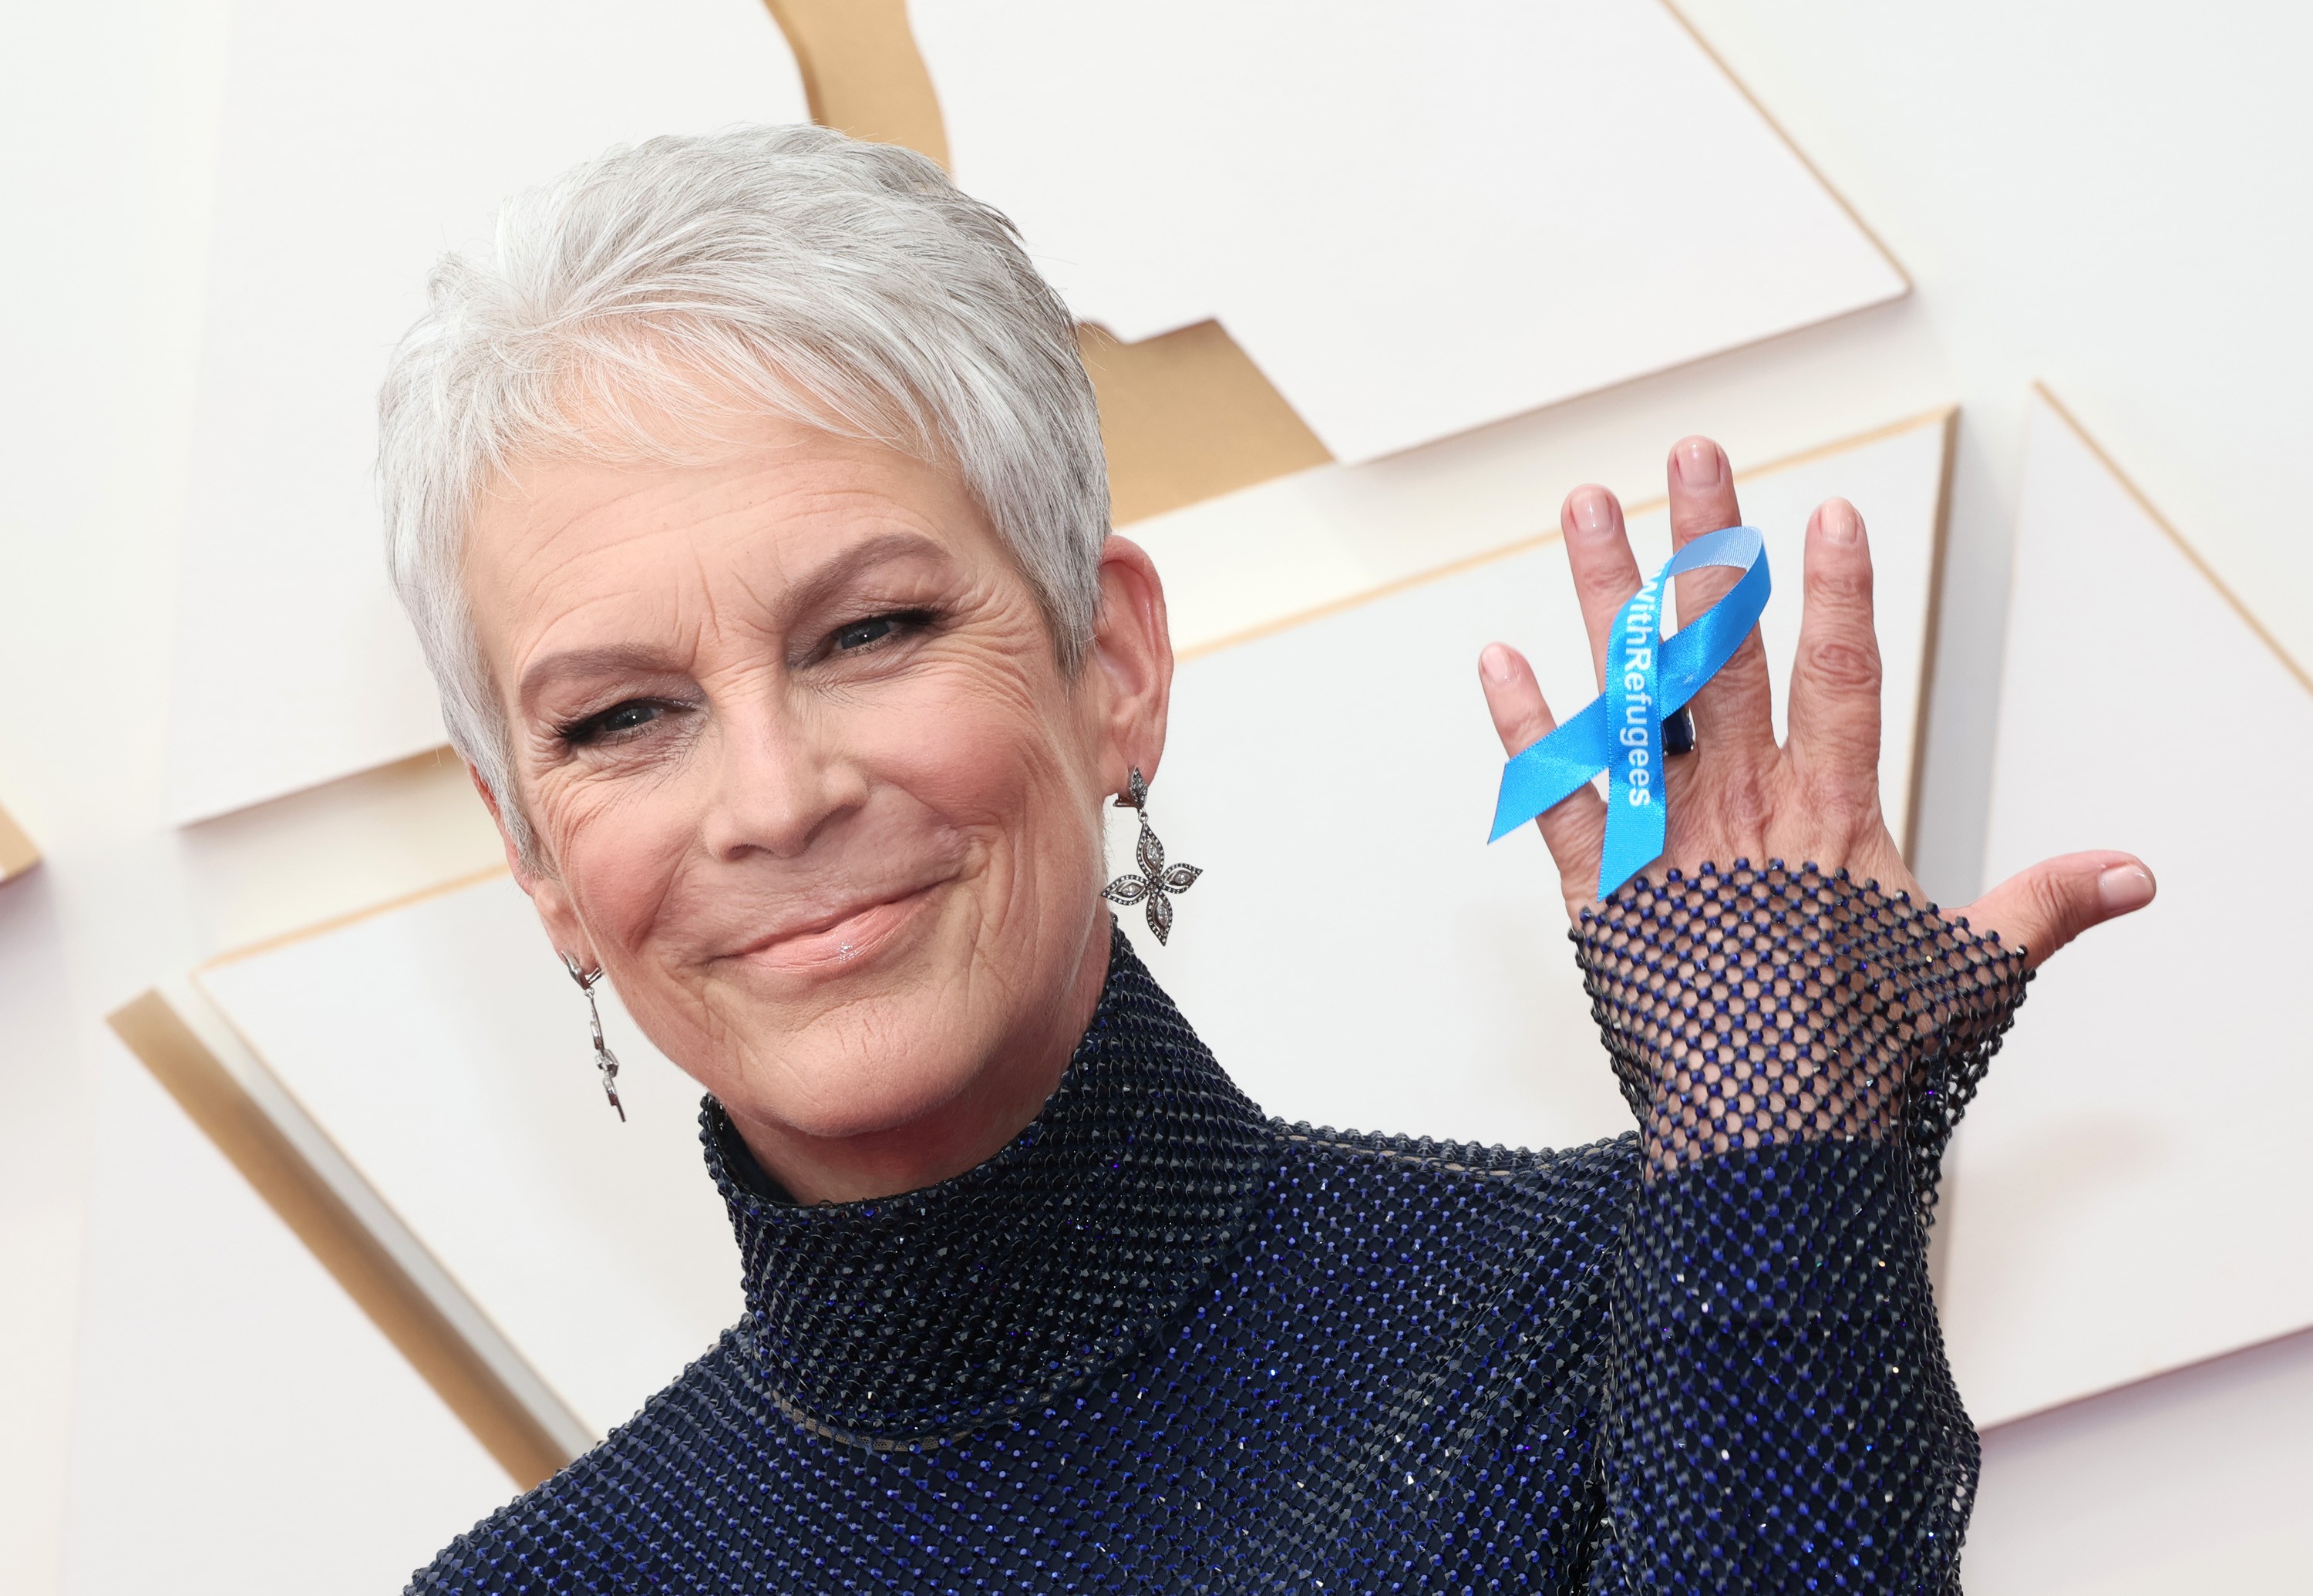 HOLLYWOOD, CALIFORNIA - MARCH 27: Jamie Lee Curtis attends the 94th Annual Academy Awards at Hollywood and Highland on March 27, 2022 in Hollywood, California. (Photo by David Livingston/Getty Images) (Foto: Getty Images)